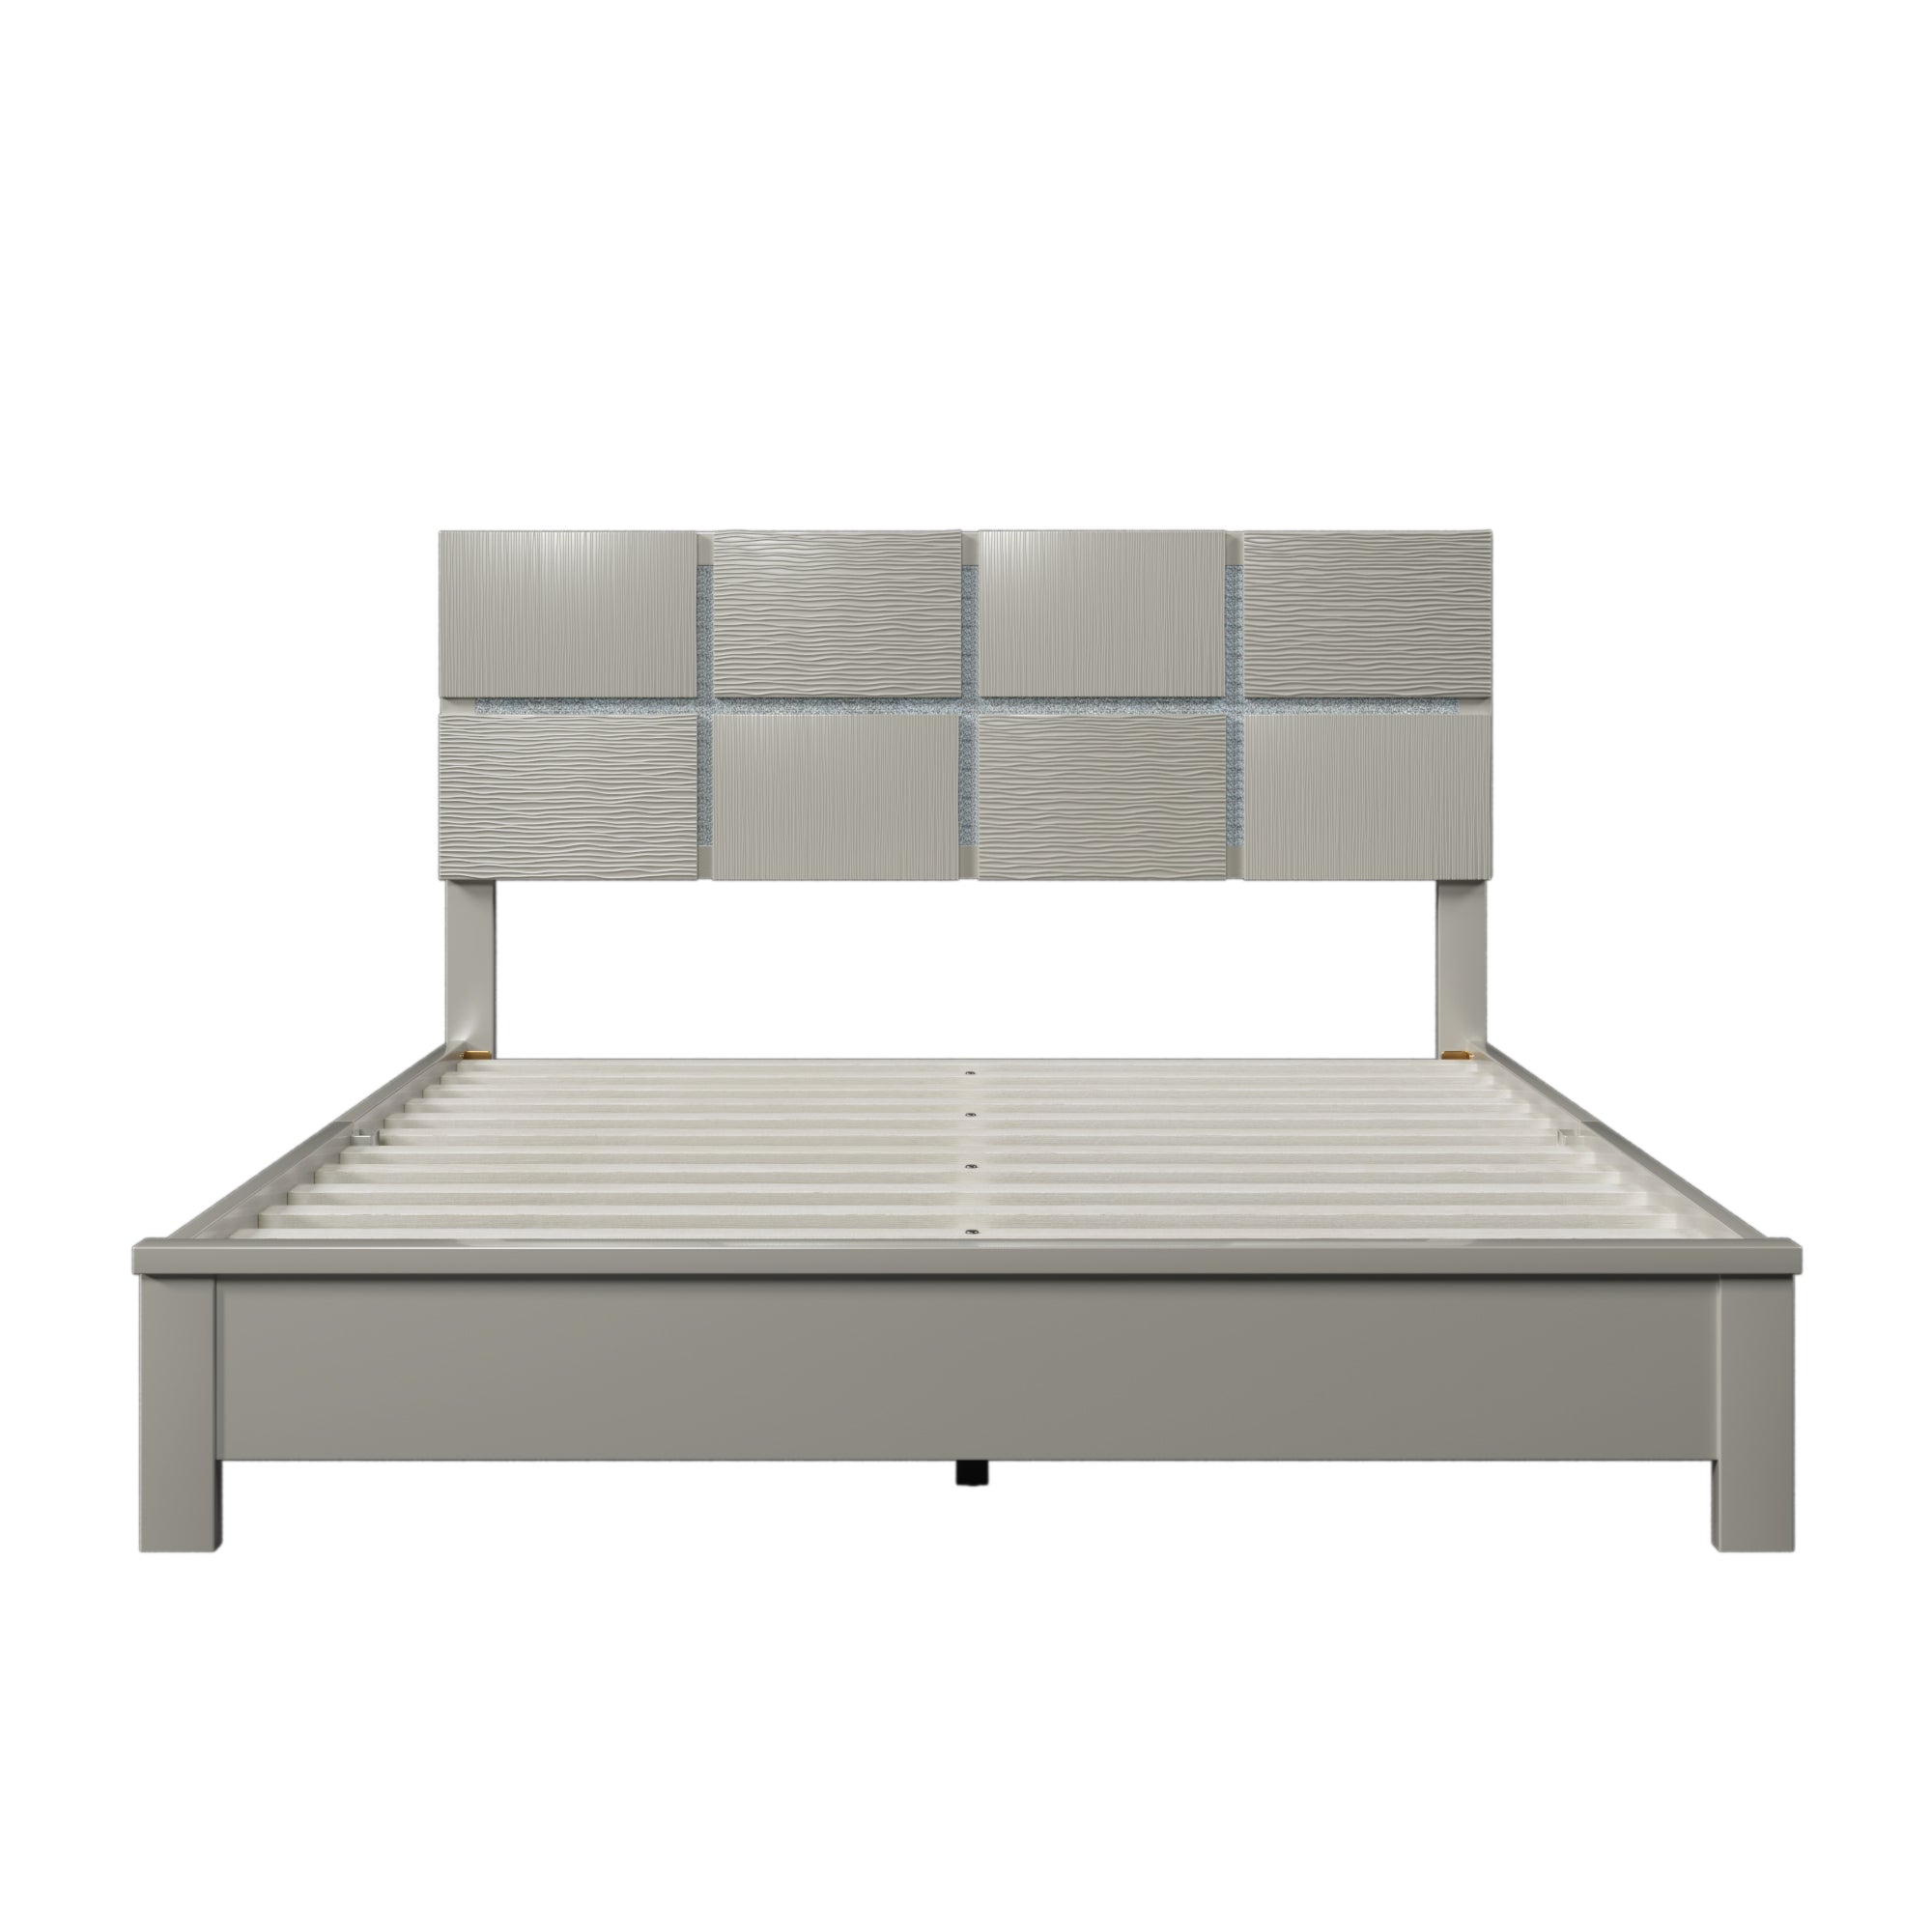 Queen Size Champagne Silver Platform Bed Solid Rubber Wood Frame and Legs - Champagne